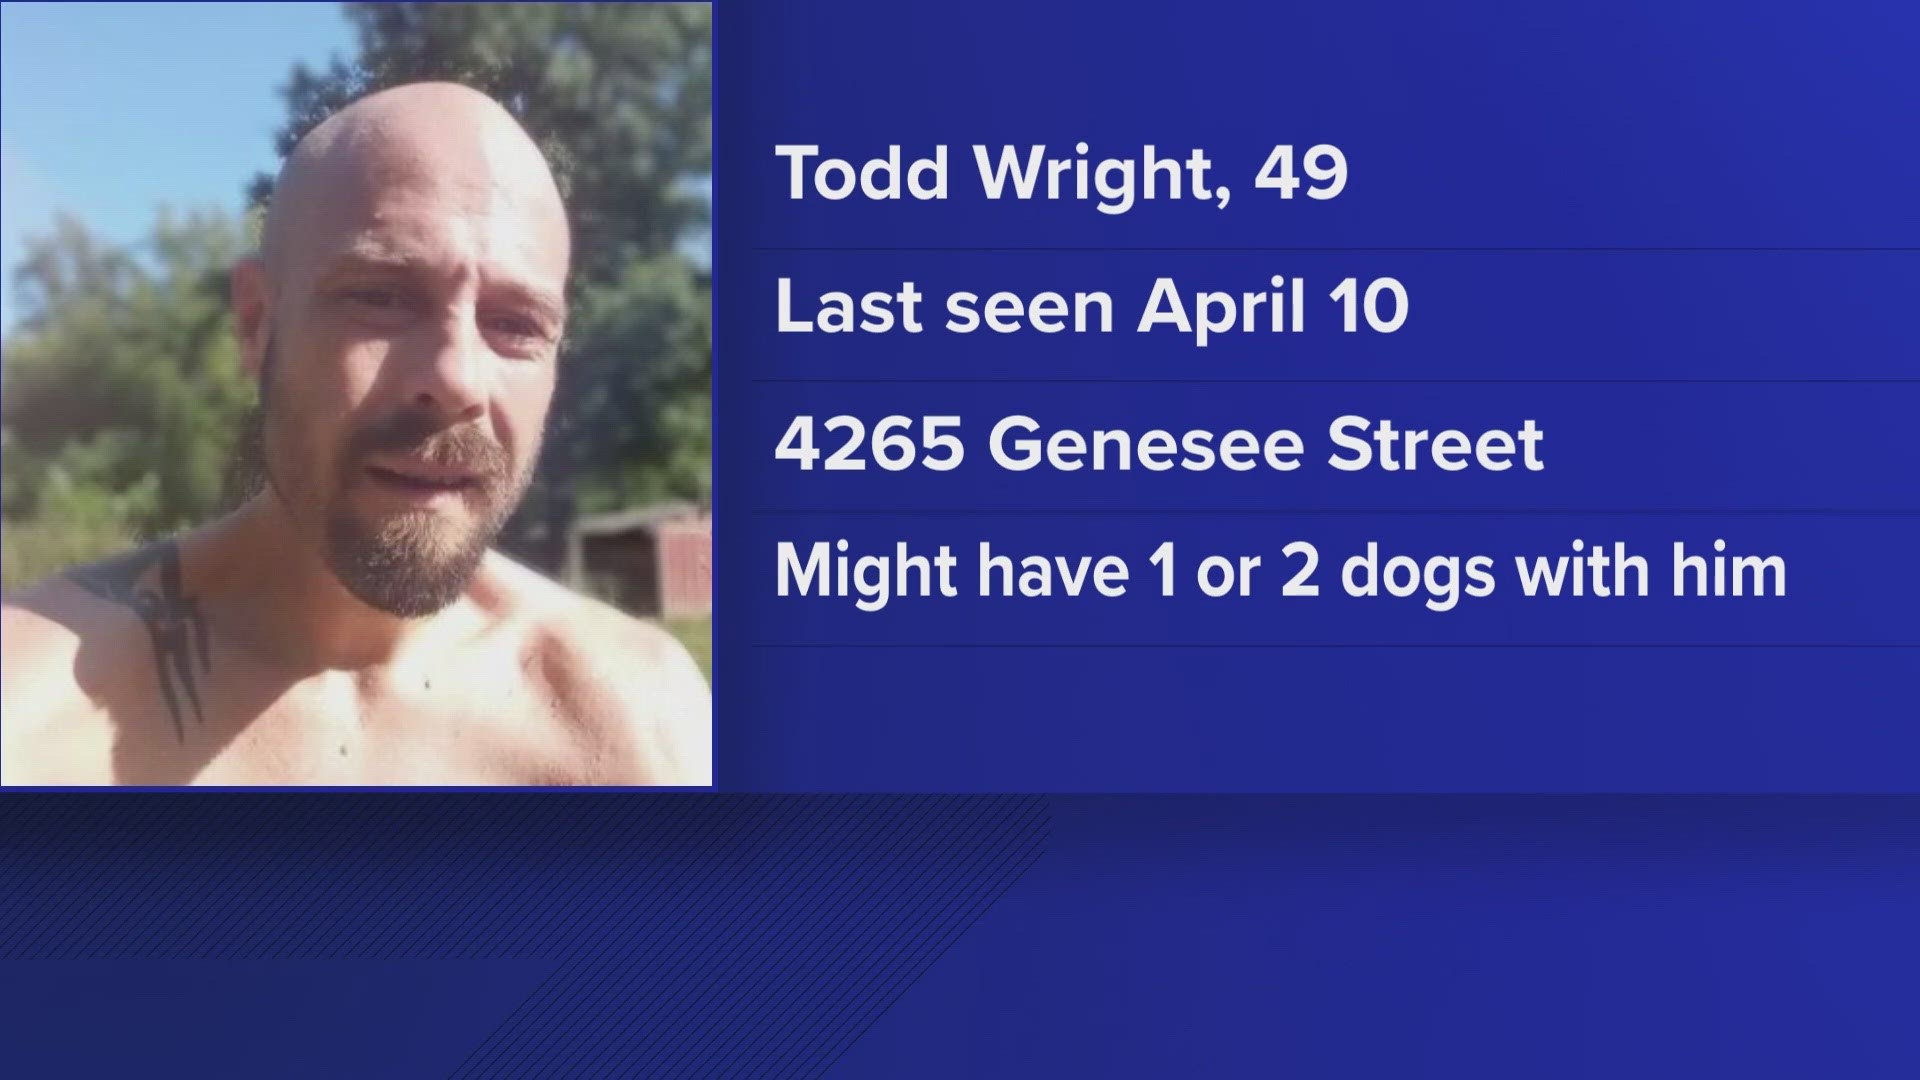 Cheektowaga Police looking for missing 49-year-old Todd Wright